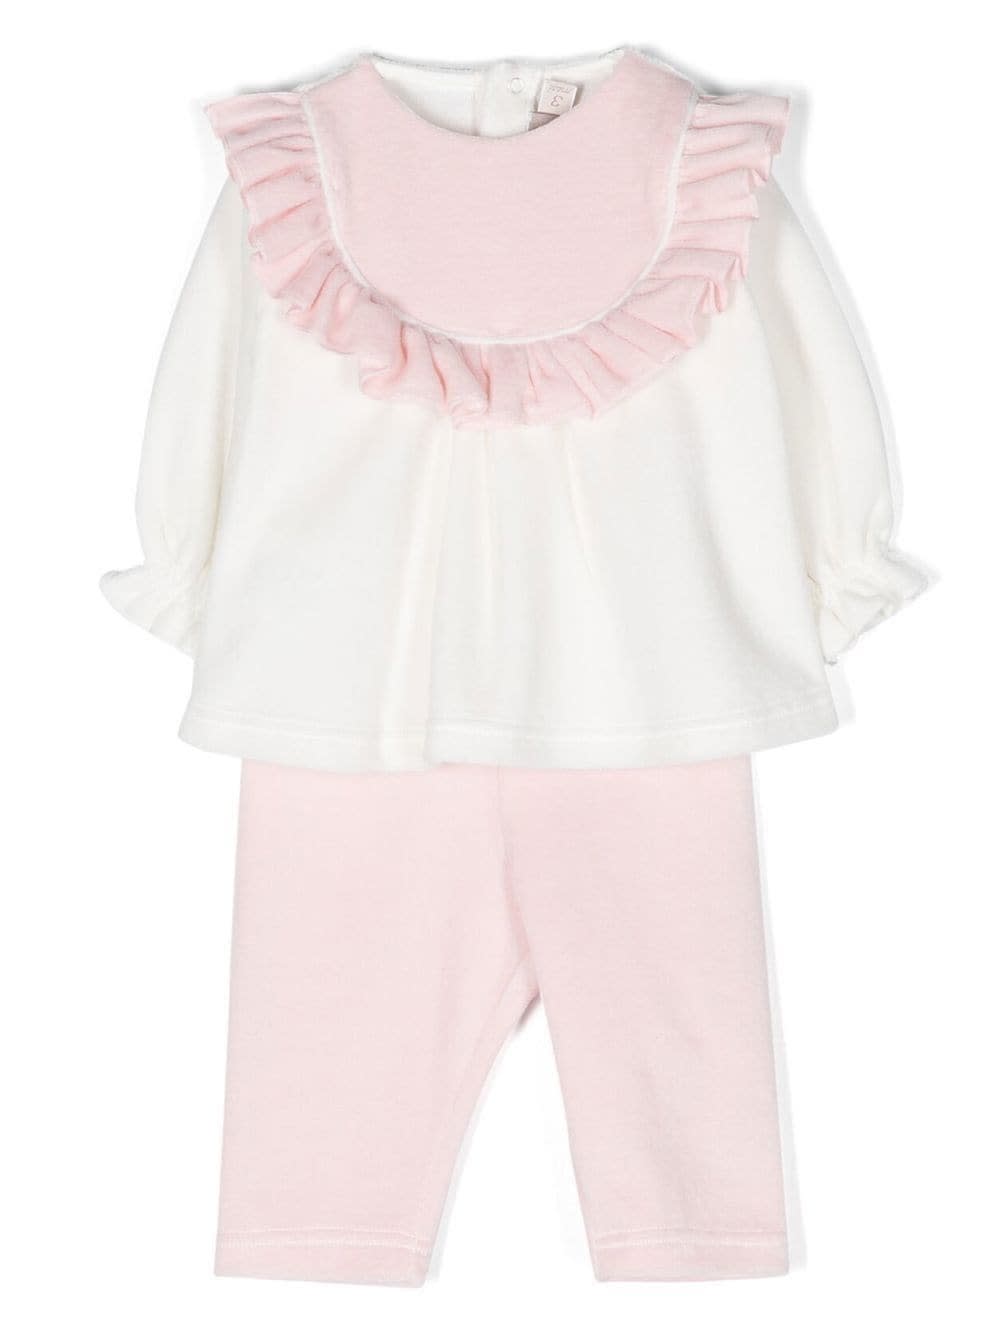 La Stupenderia Babies' Complete With Ruffles In Pink